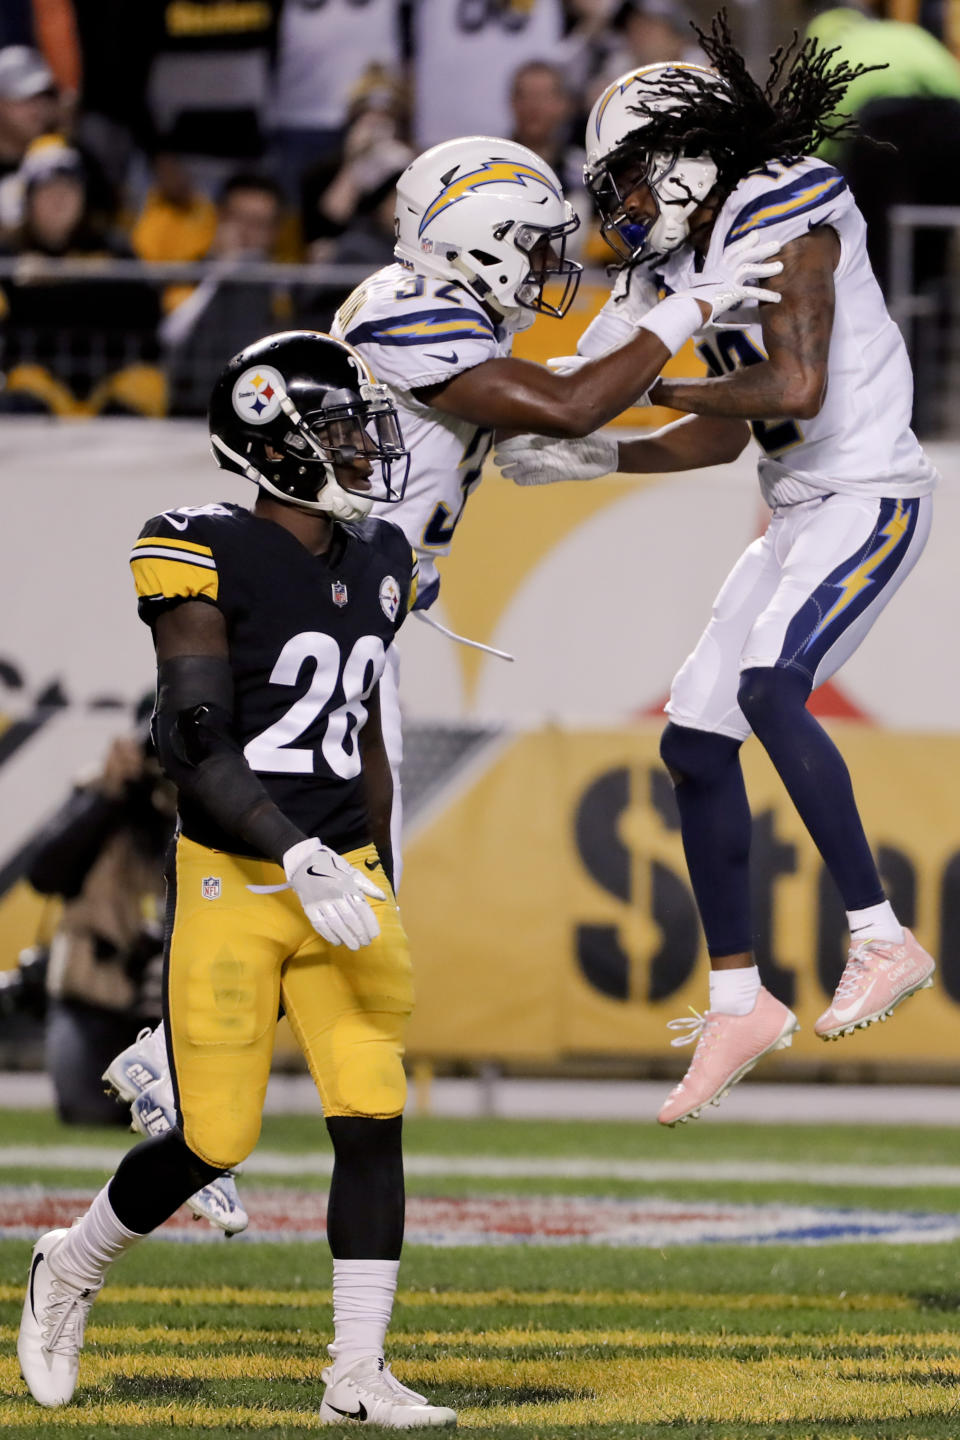 Los Angeles Chargers wide receiver Travis Benjamin (12) celebrates with running back Justin Jackson (32) after scoring a touchdown past Pittsburgh Steelers cornerback Mike Hilton (28) in the first half of an NFL football game, Sunday, Dec. 2, 2018, in Pittsburgh. (AP Photo/Gene J. Puskar)